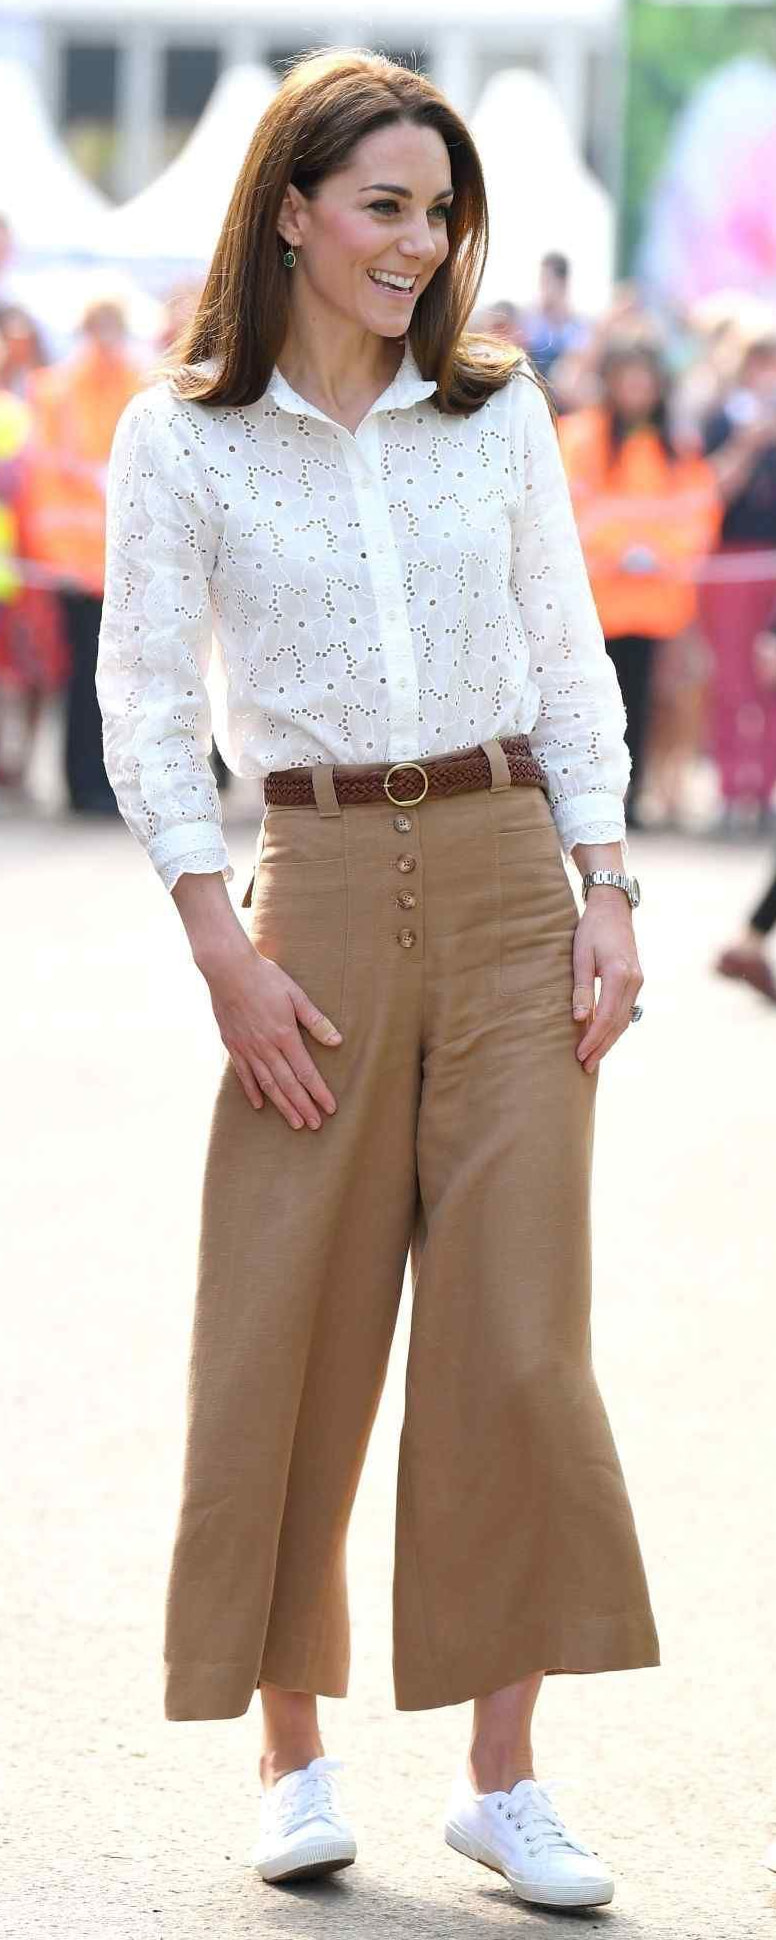 M.i.h Jeans Mabel White Broderie Anglaise Shirt as seen on Kate Middleton, The Duchess of Cambridge.